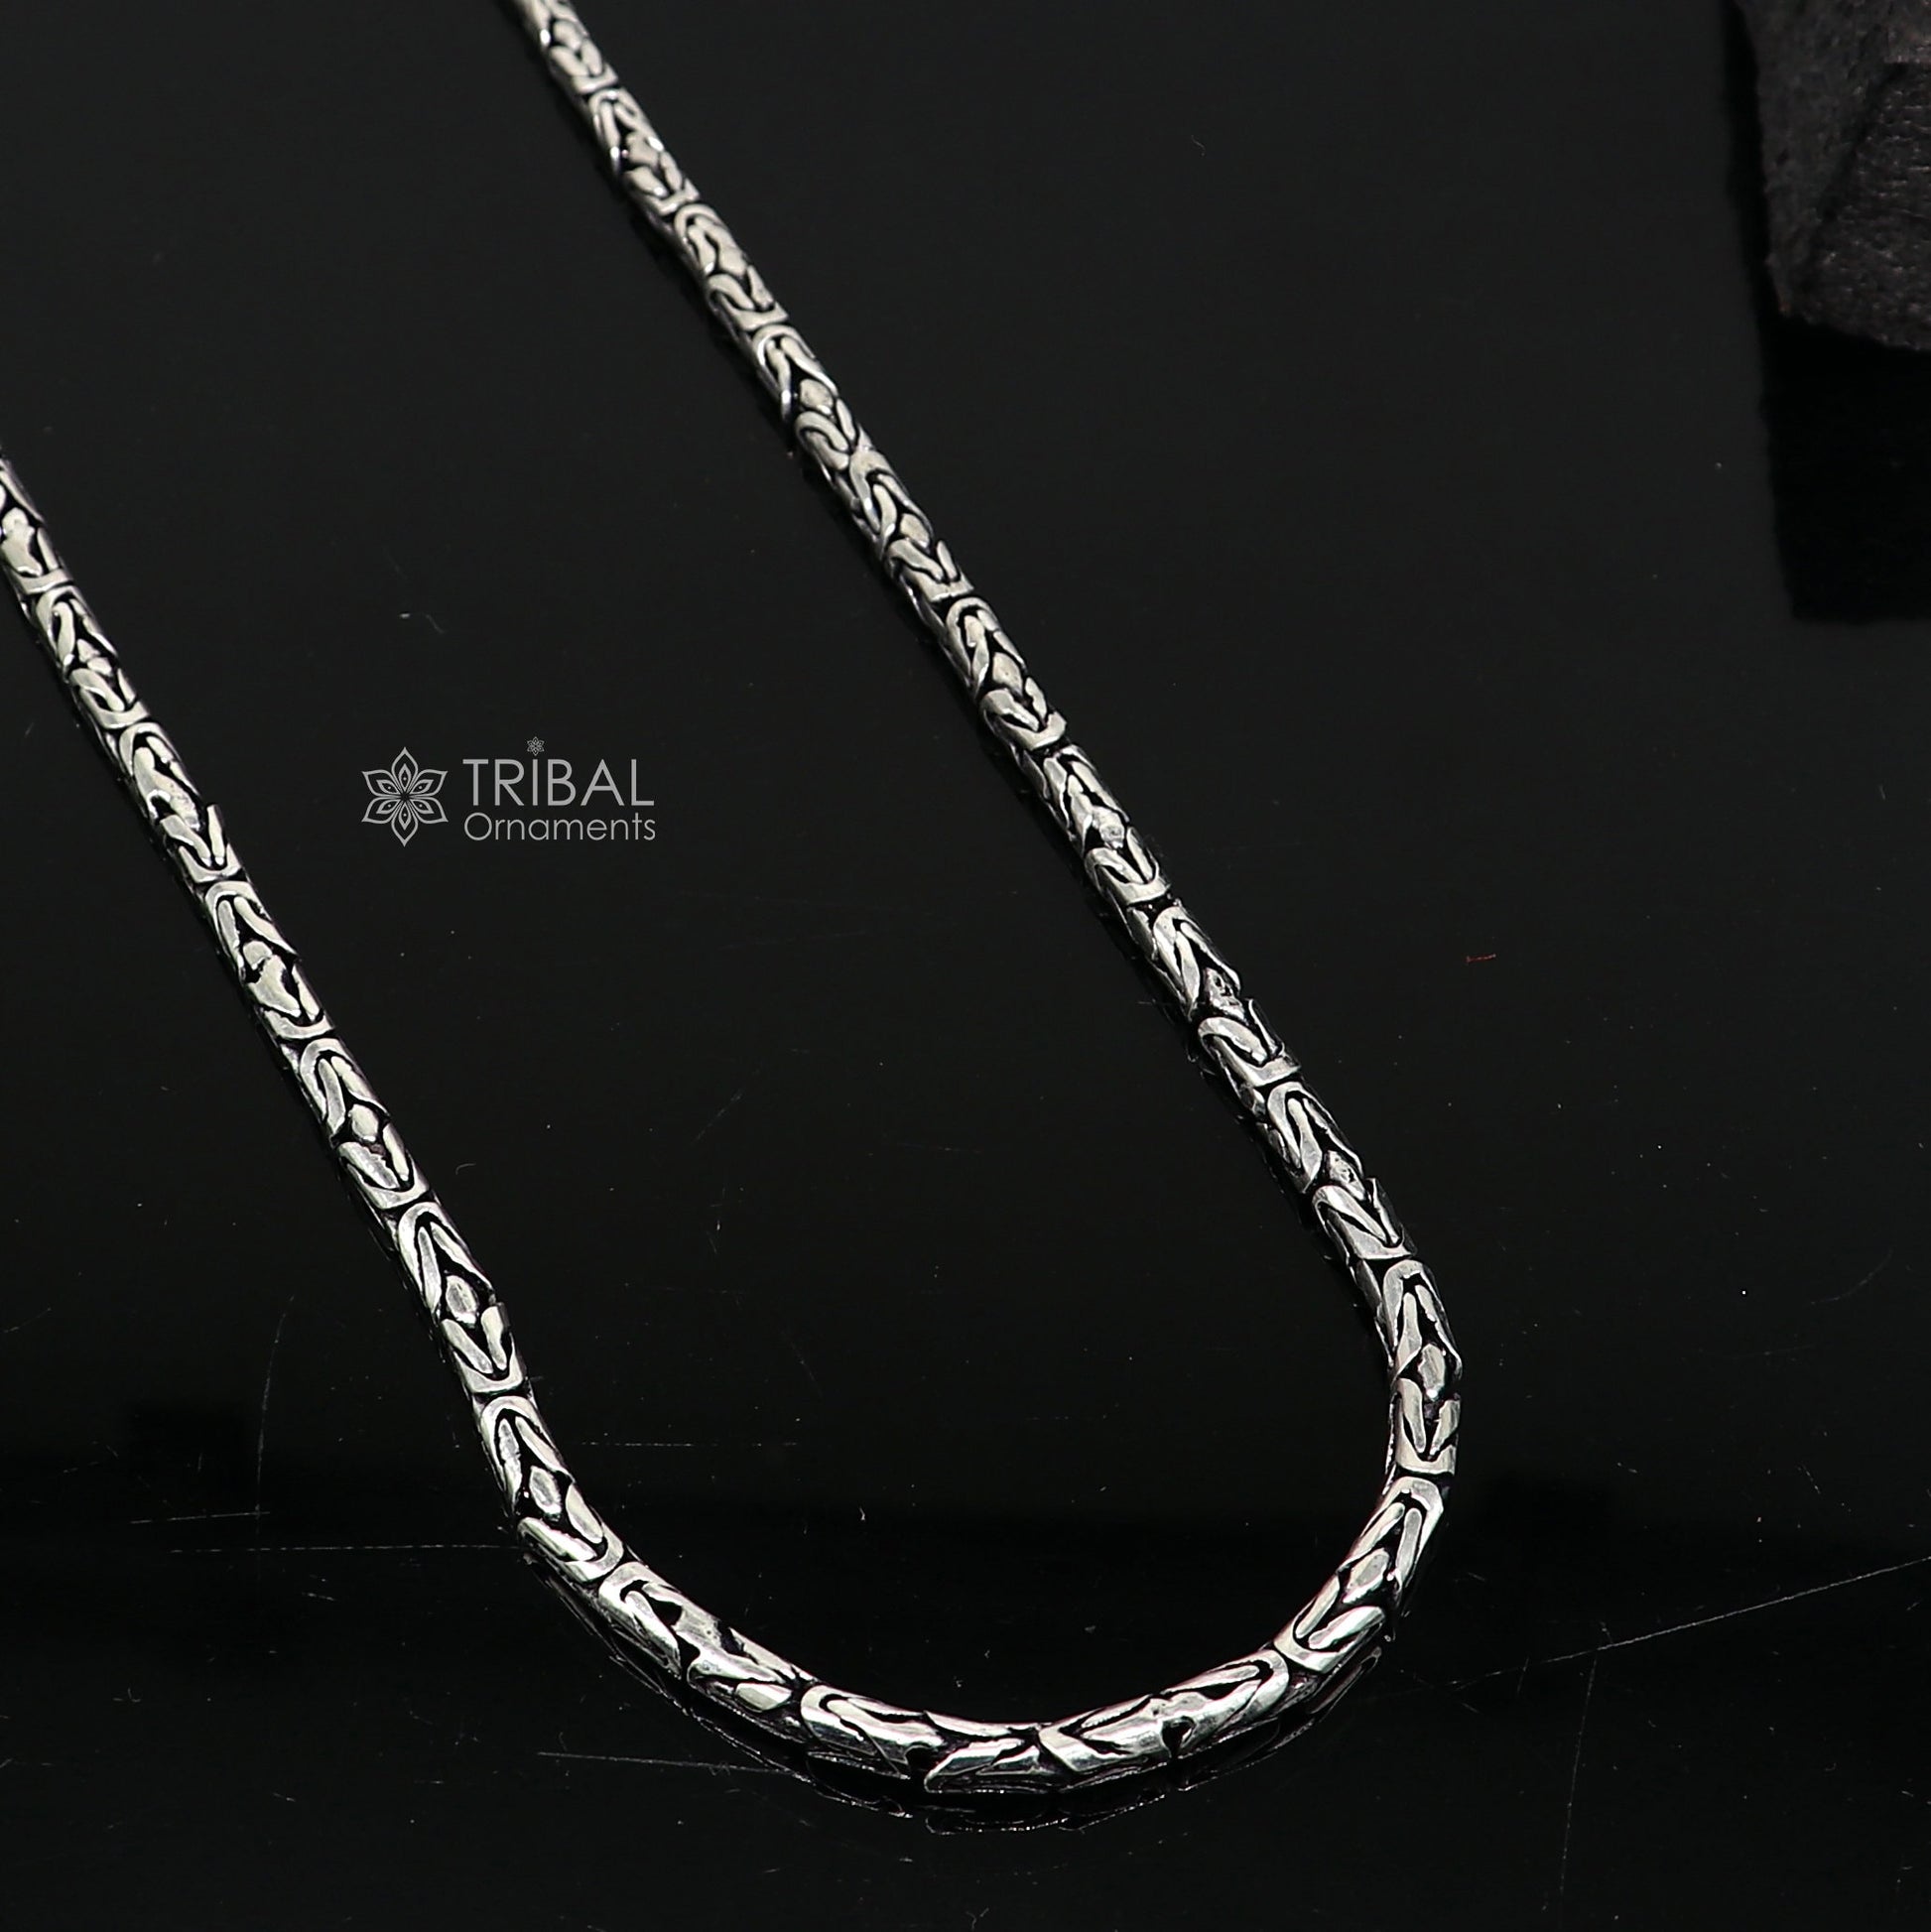 4mm 925 sterling silver handmade solid vintage byzantine design chain heavy  necklace, amazing luxury royal gifting designer jewelry ch563 - TRIBAL ORNAMENTS